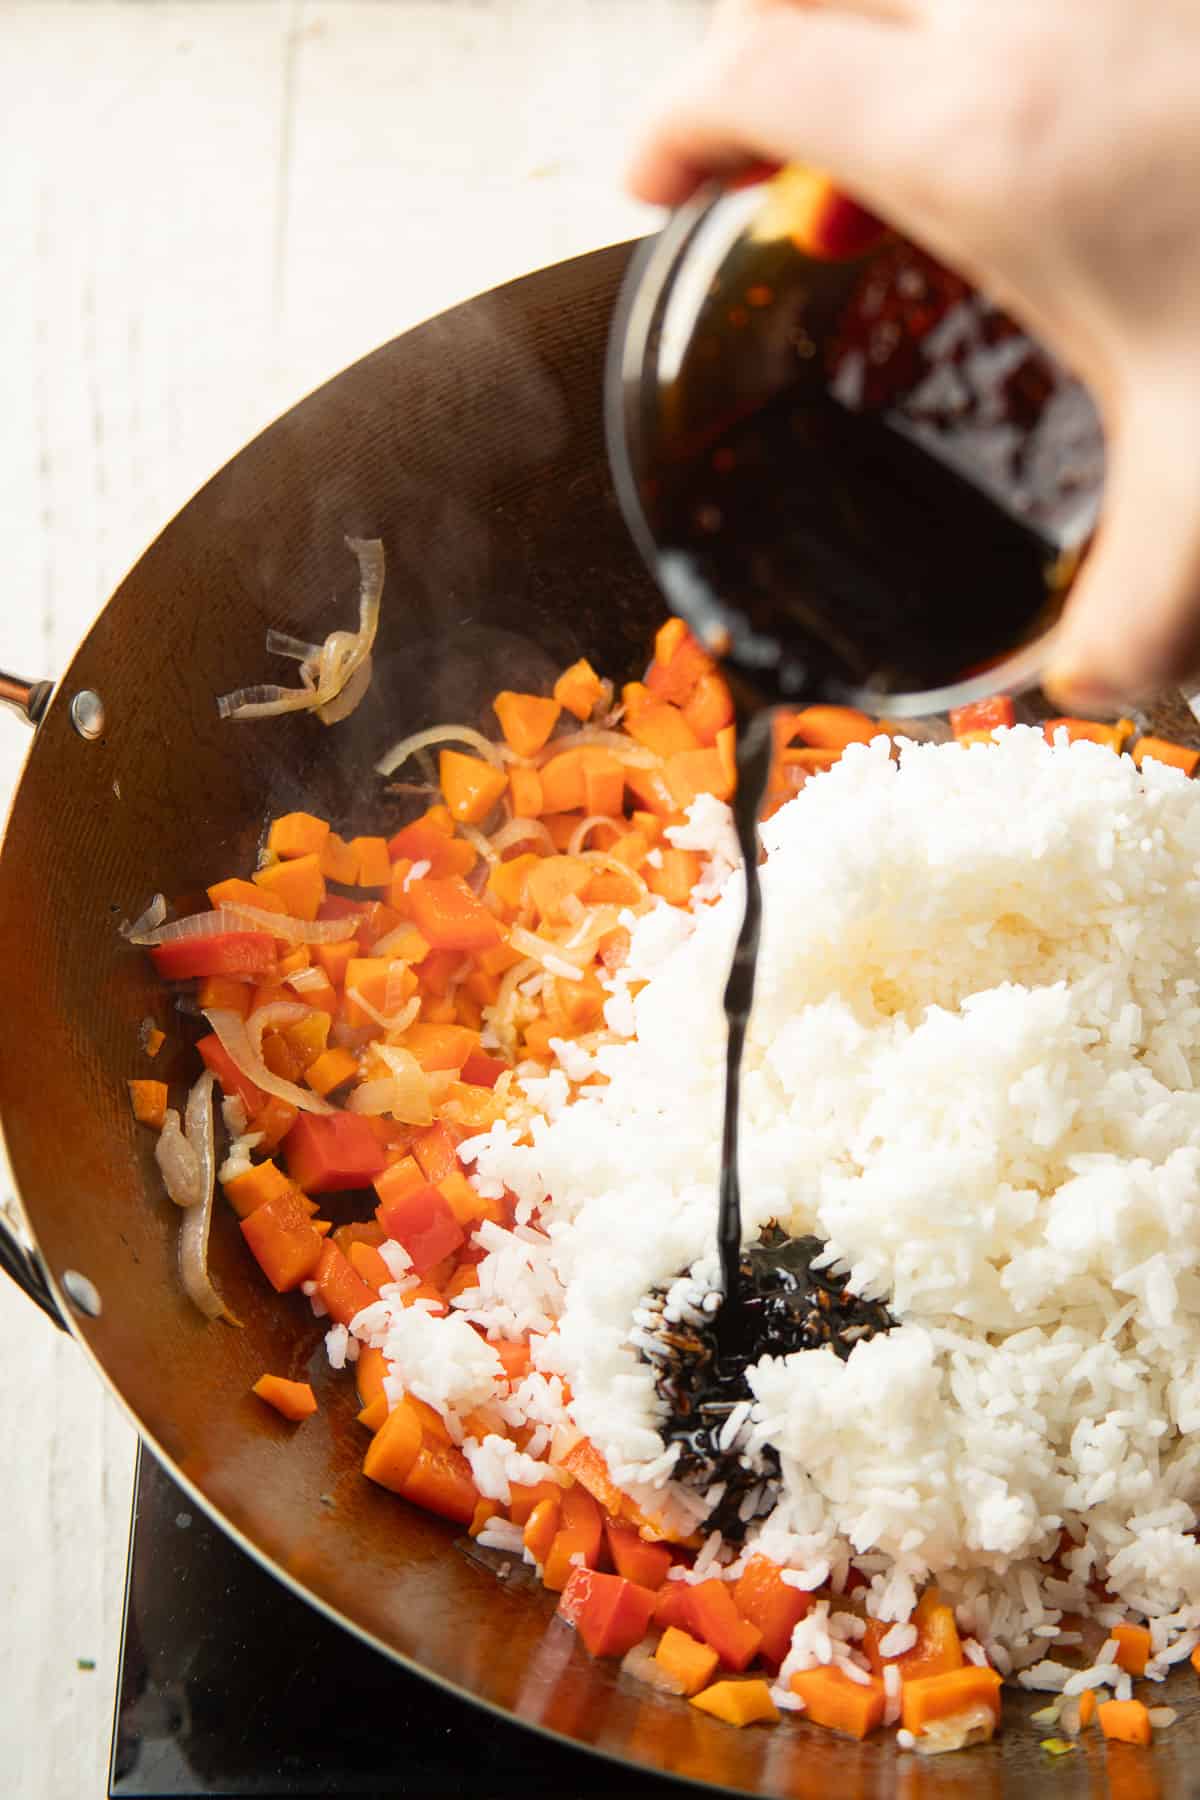 Hand pouring sauce into a wok filled with stir-fried peppers and rice.